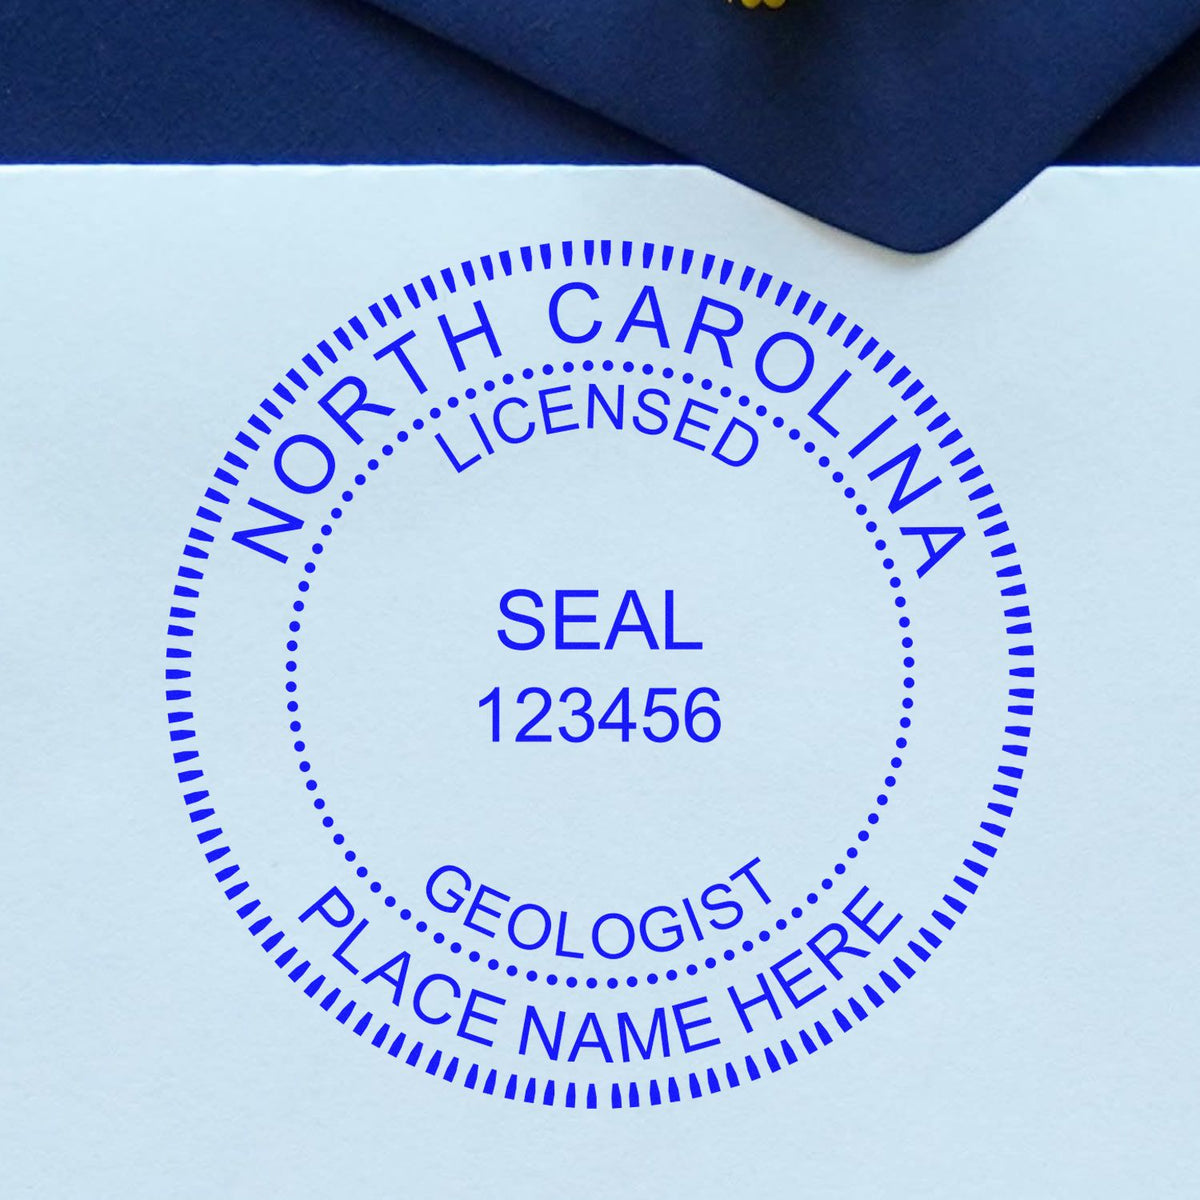 An alternative view of the North Carolina Professional Geologist Seal Stamp stamped on a sheet of paper showing the image in use